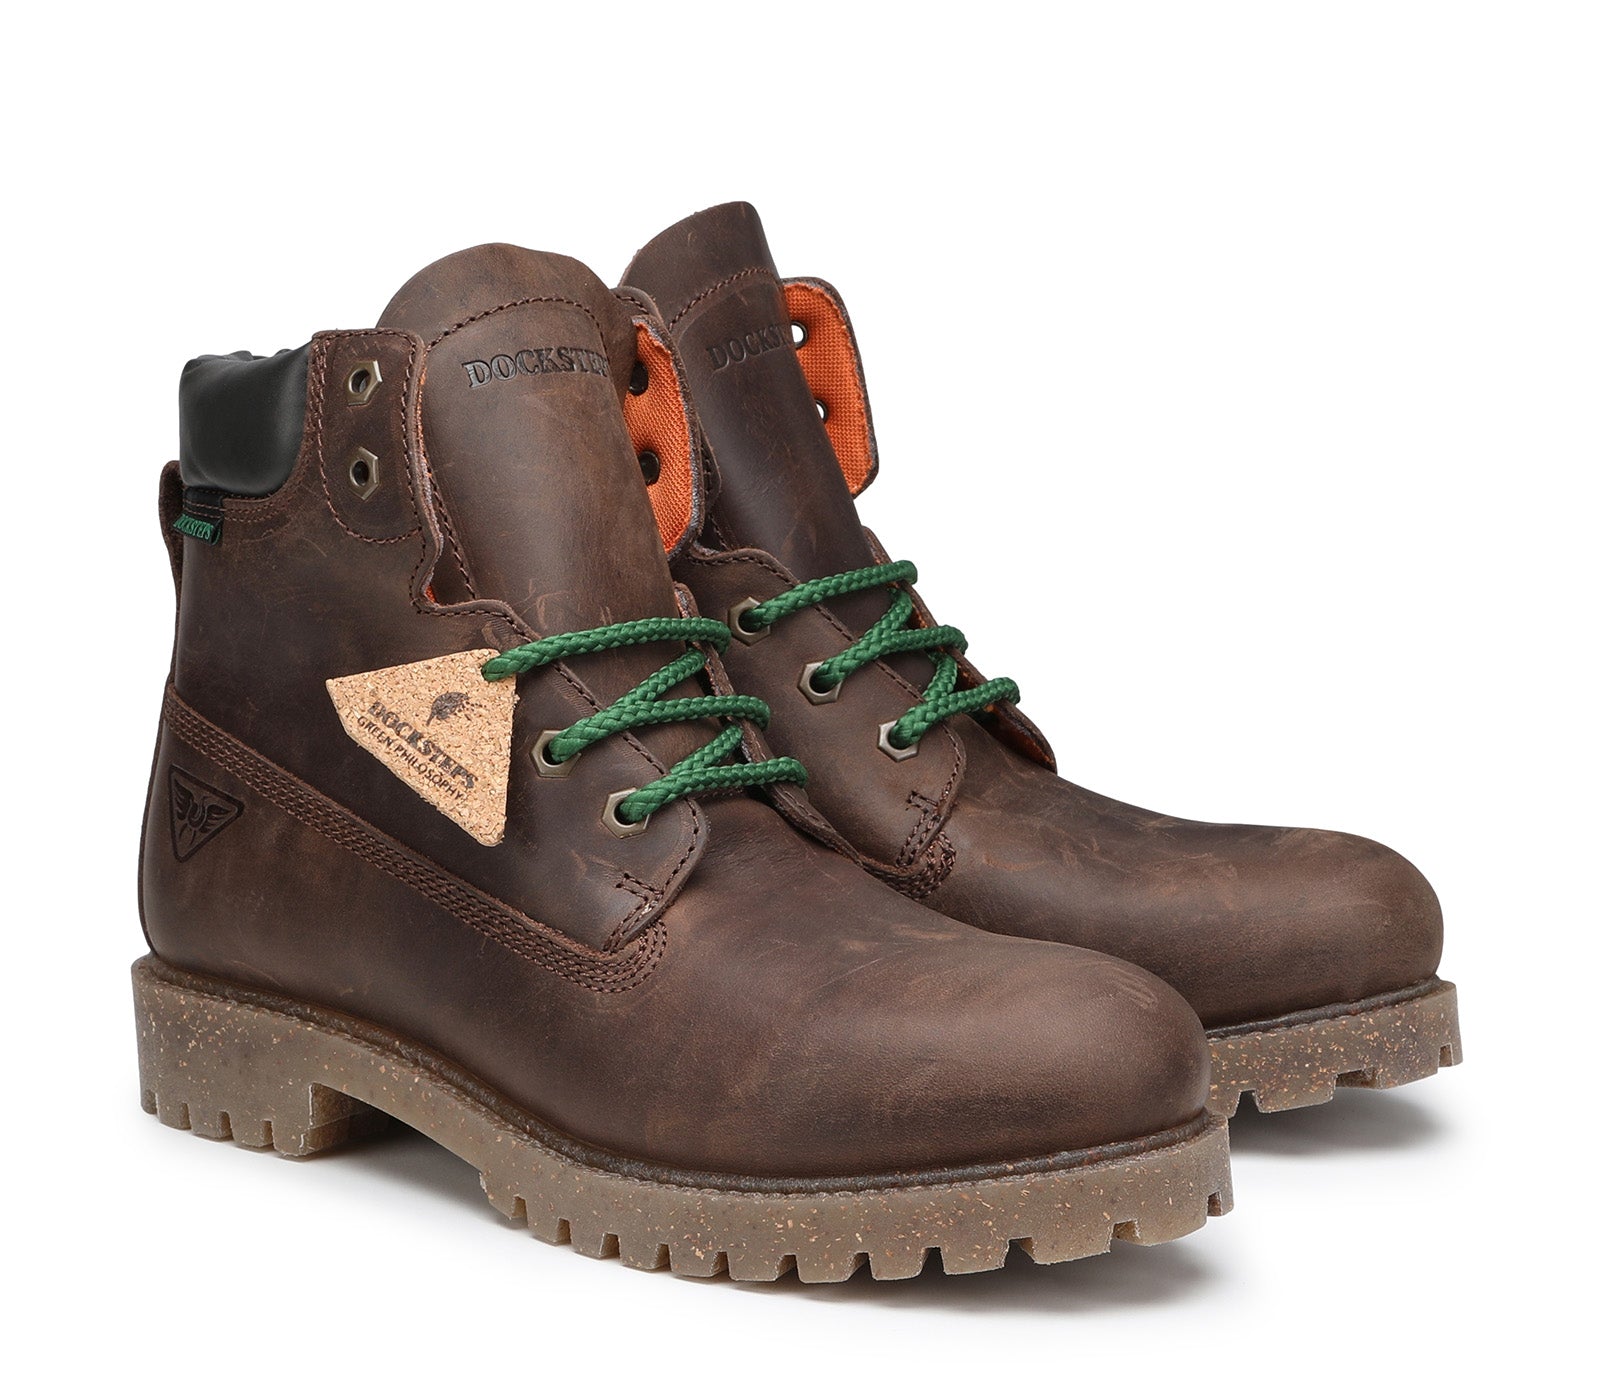 Men's Dark Brown Laced Boot Made from Sustainable Materials 